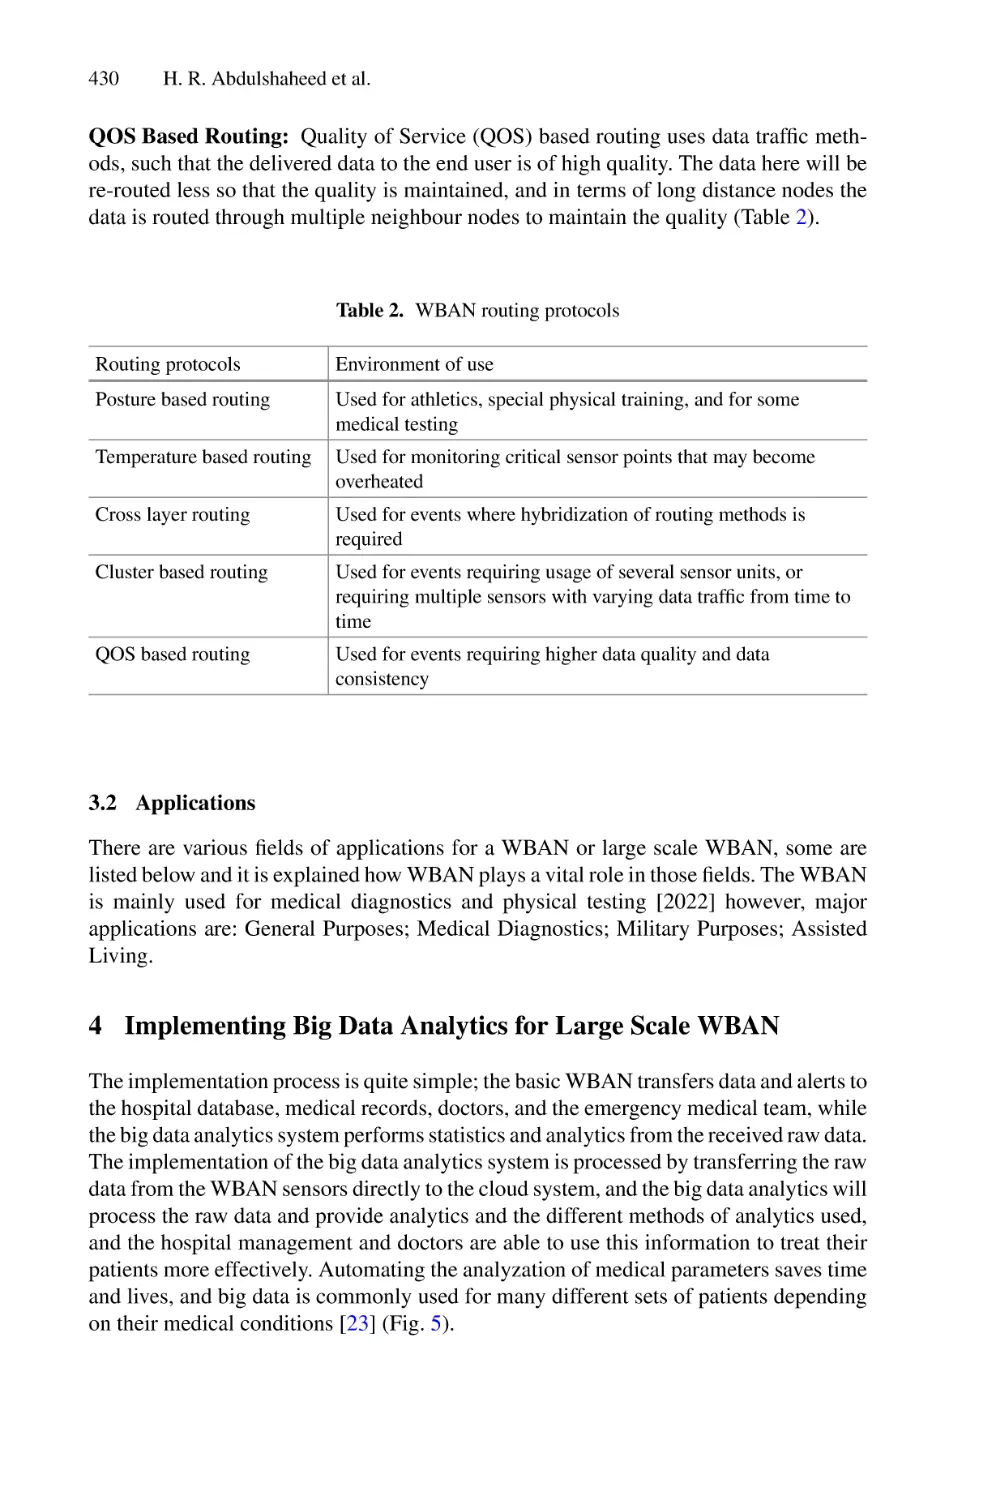 3.2 Applications
4 Implementing Big Data Analytics for Large Scale WBAN